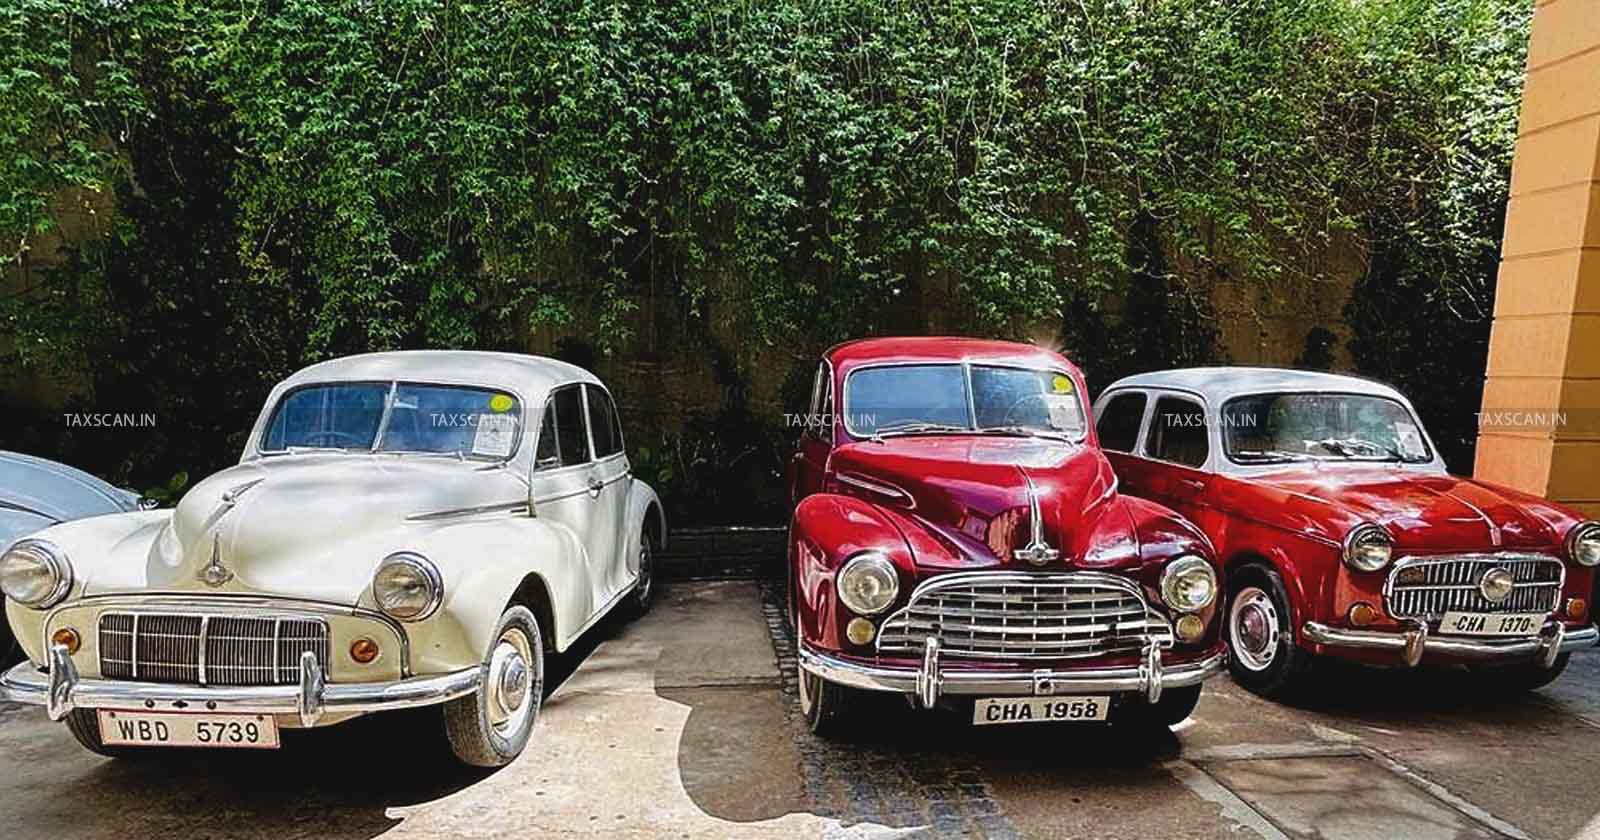 Tax Implications for - Using Antique Automobiles in India - TAXSCAN